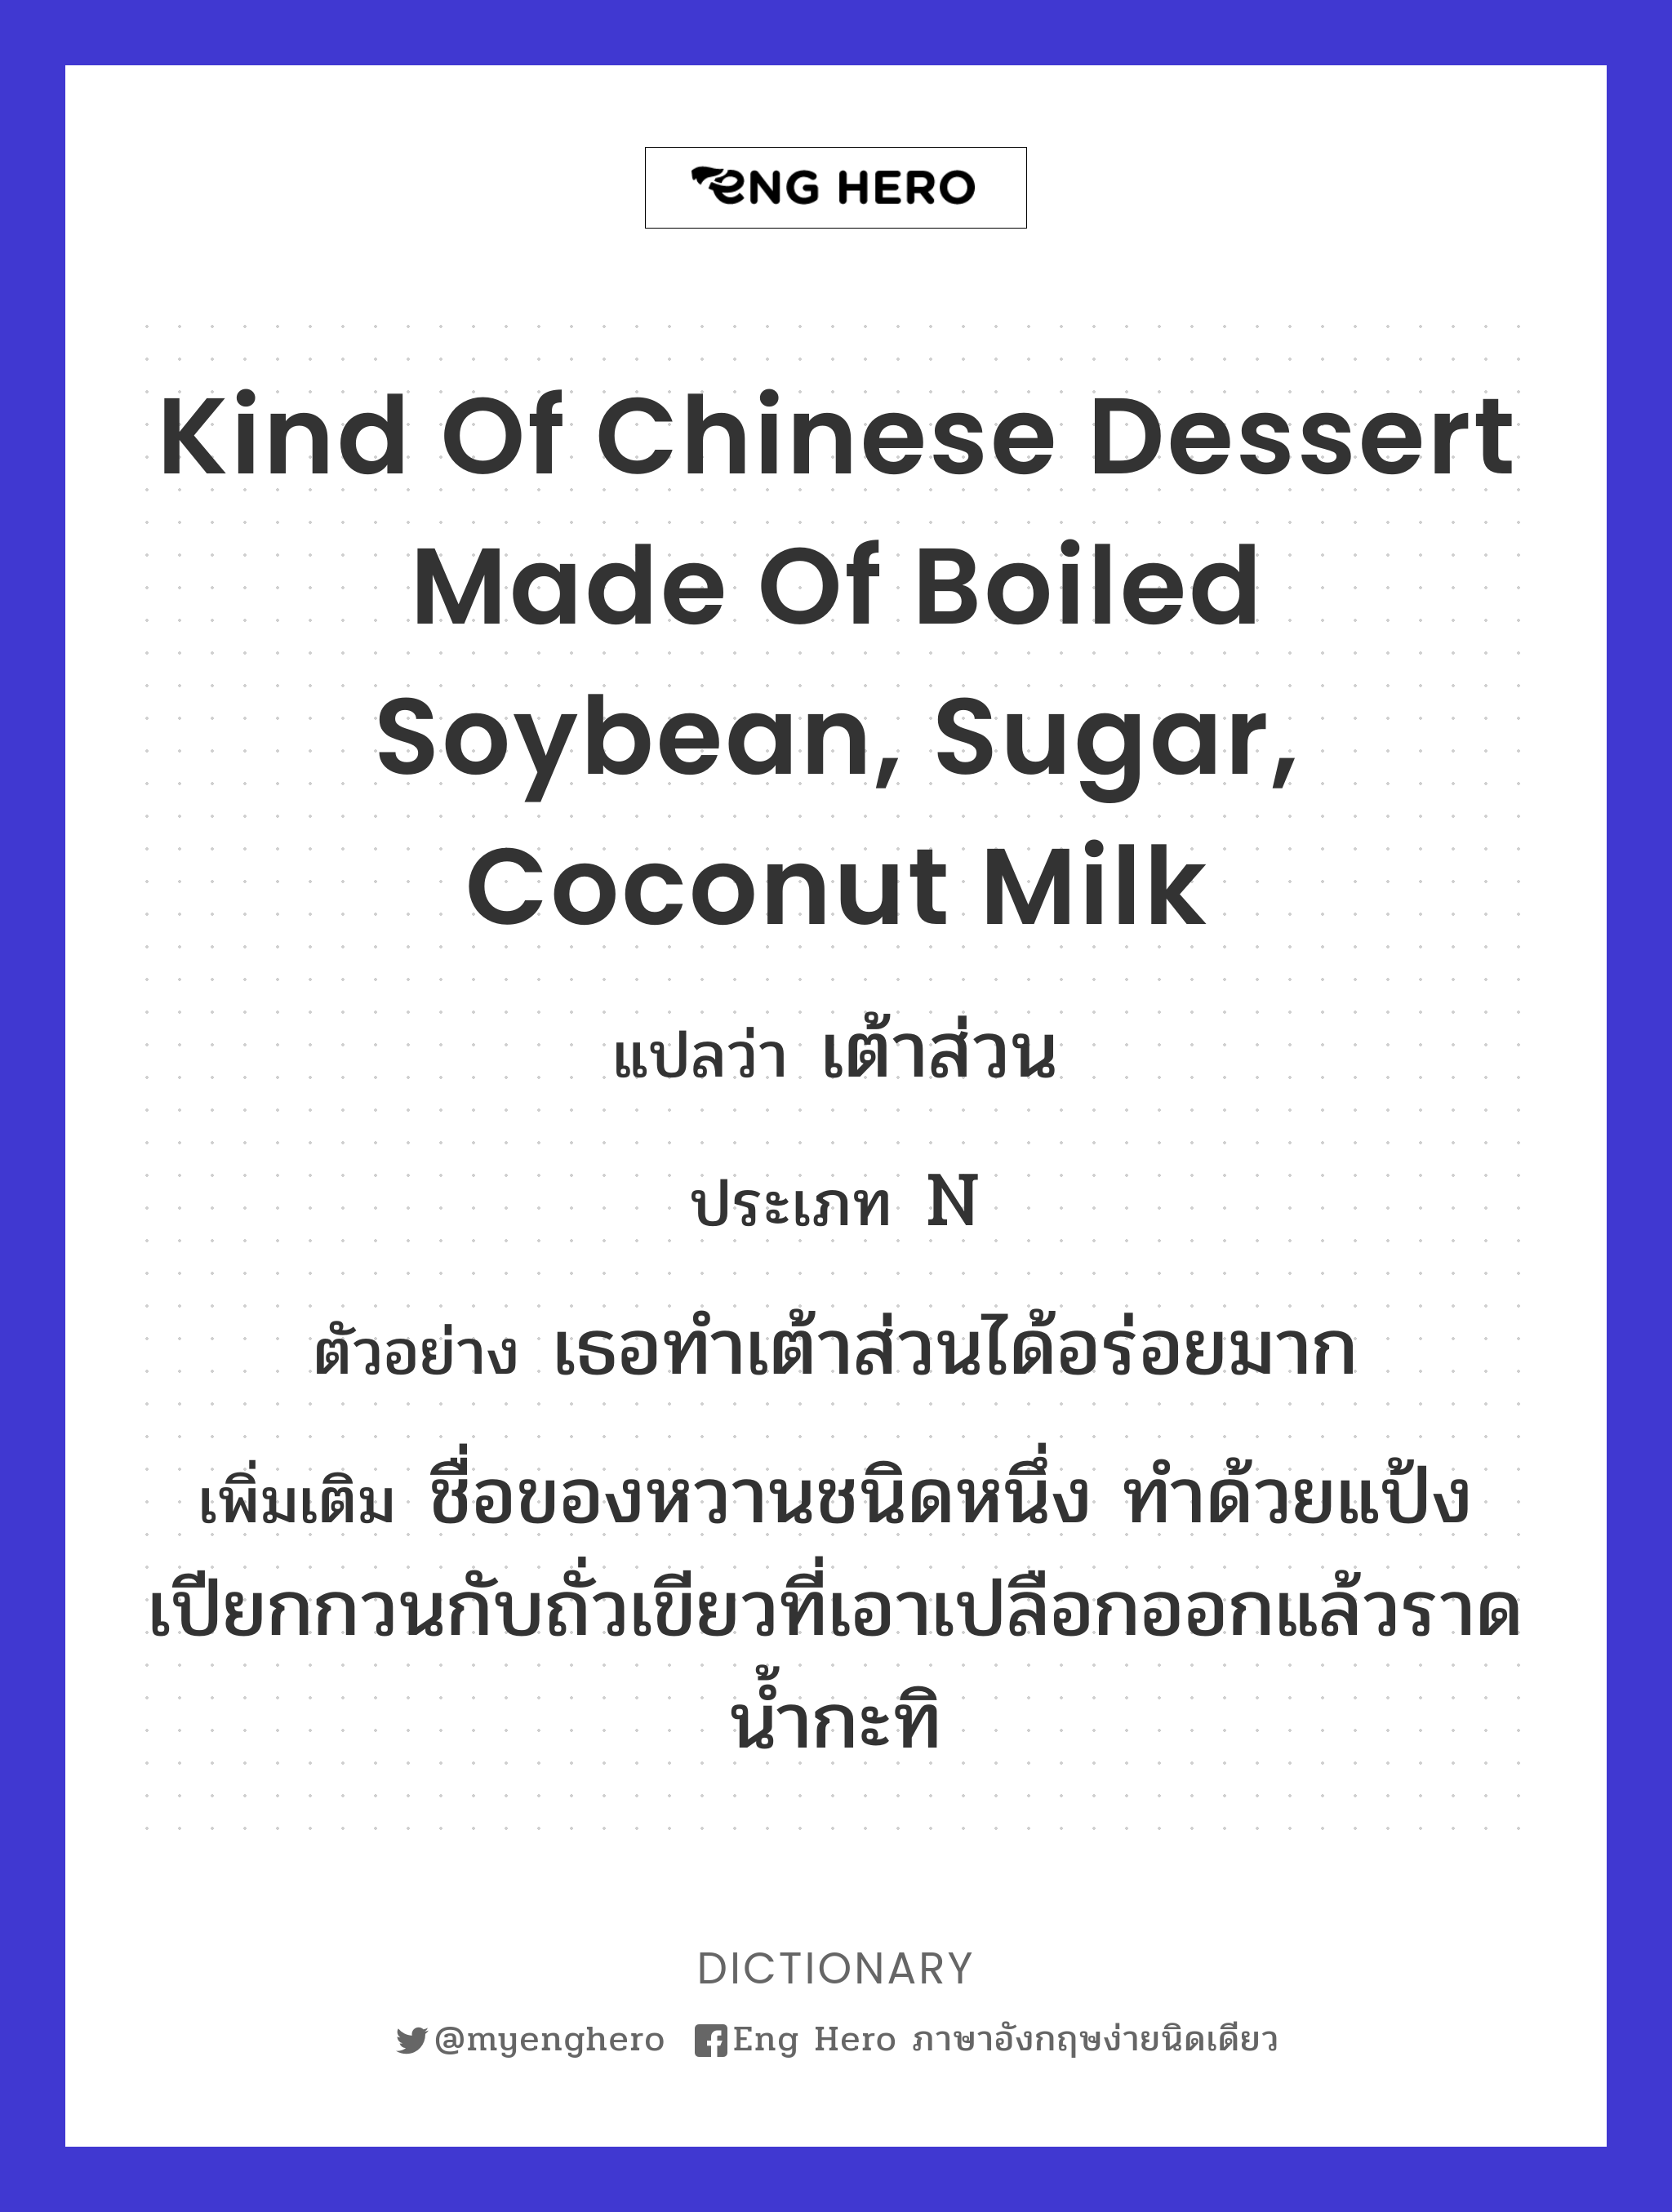 kind of Chinese dessert made of boiled soybean, sugar, coconut milk